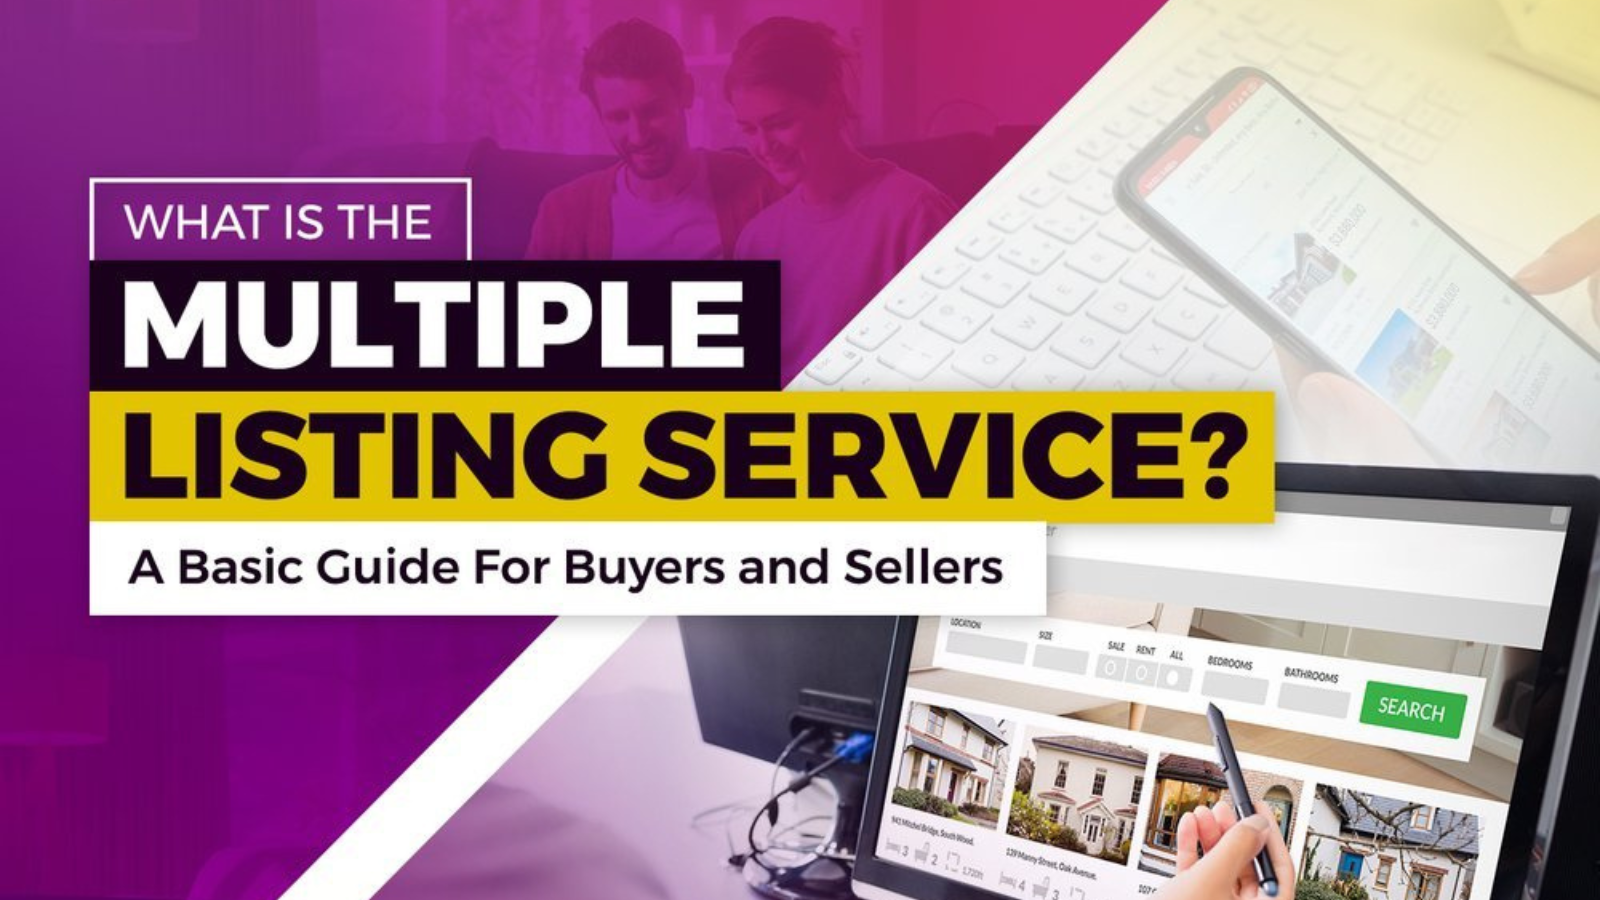 What is the Multiple Listing Service? A Basic Guide For Buyers and Sellers